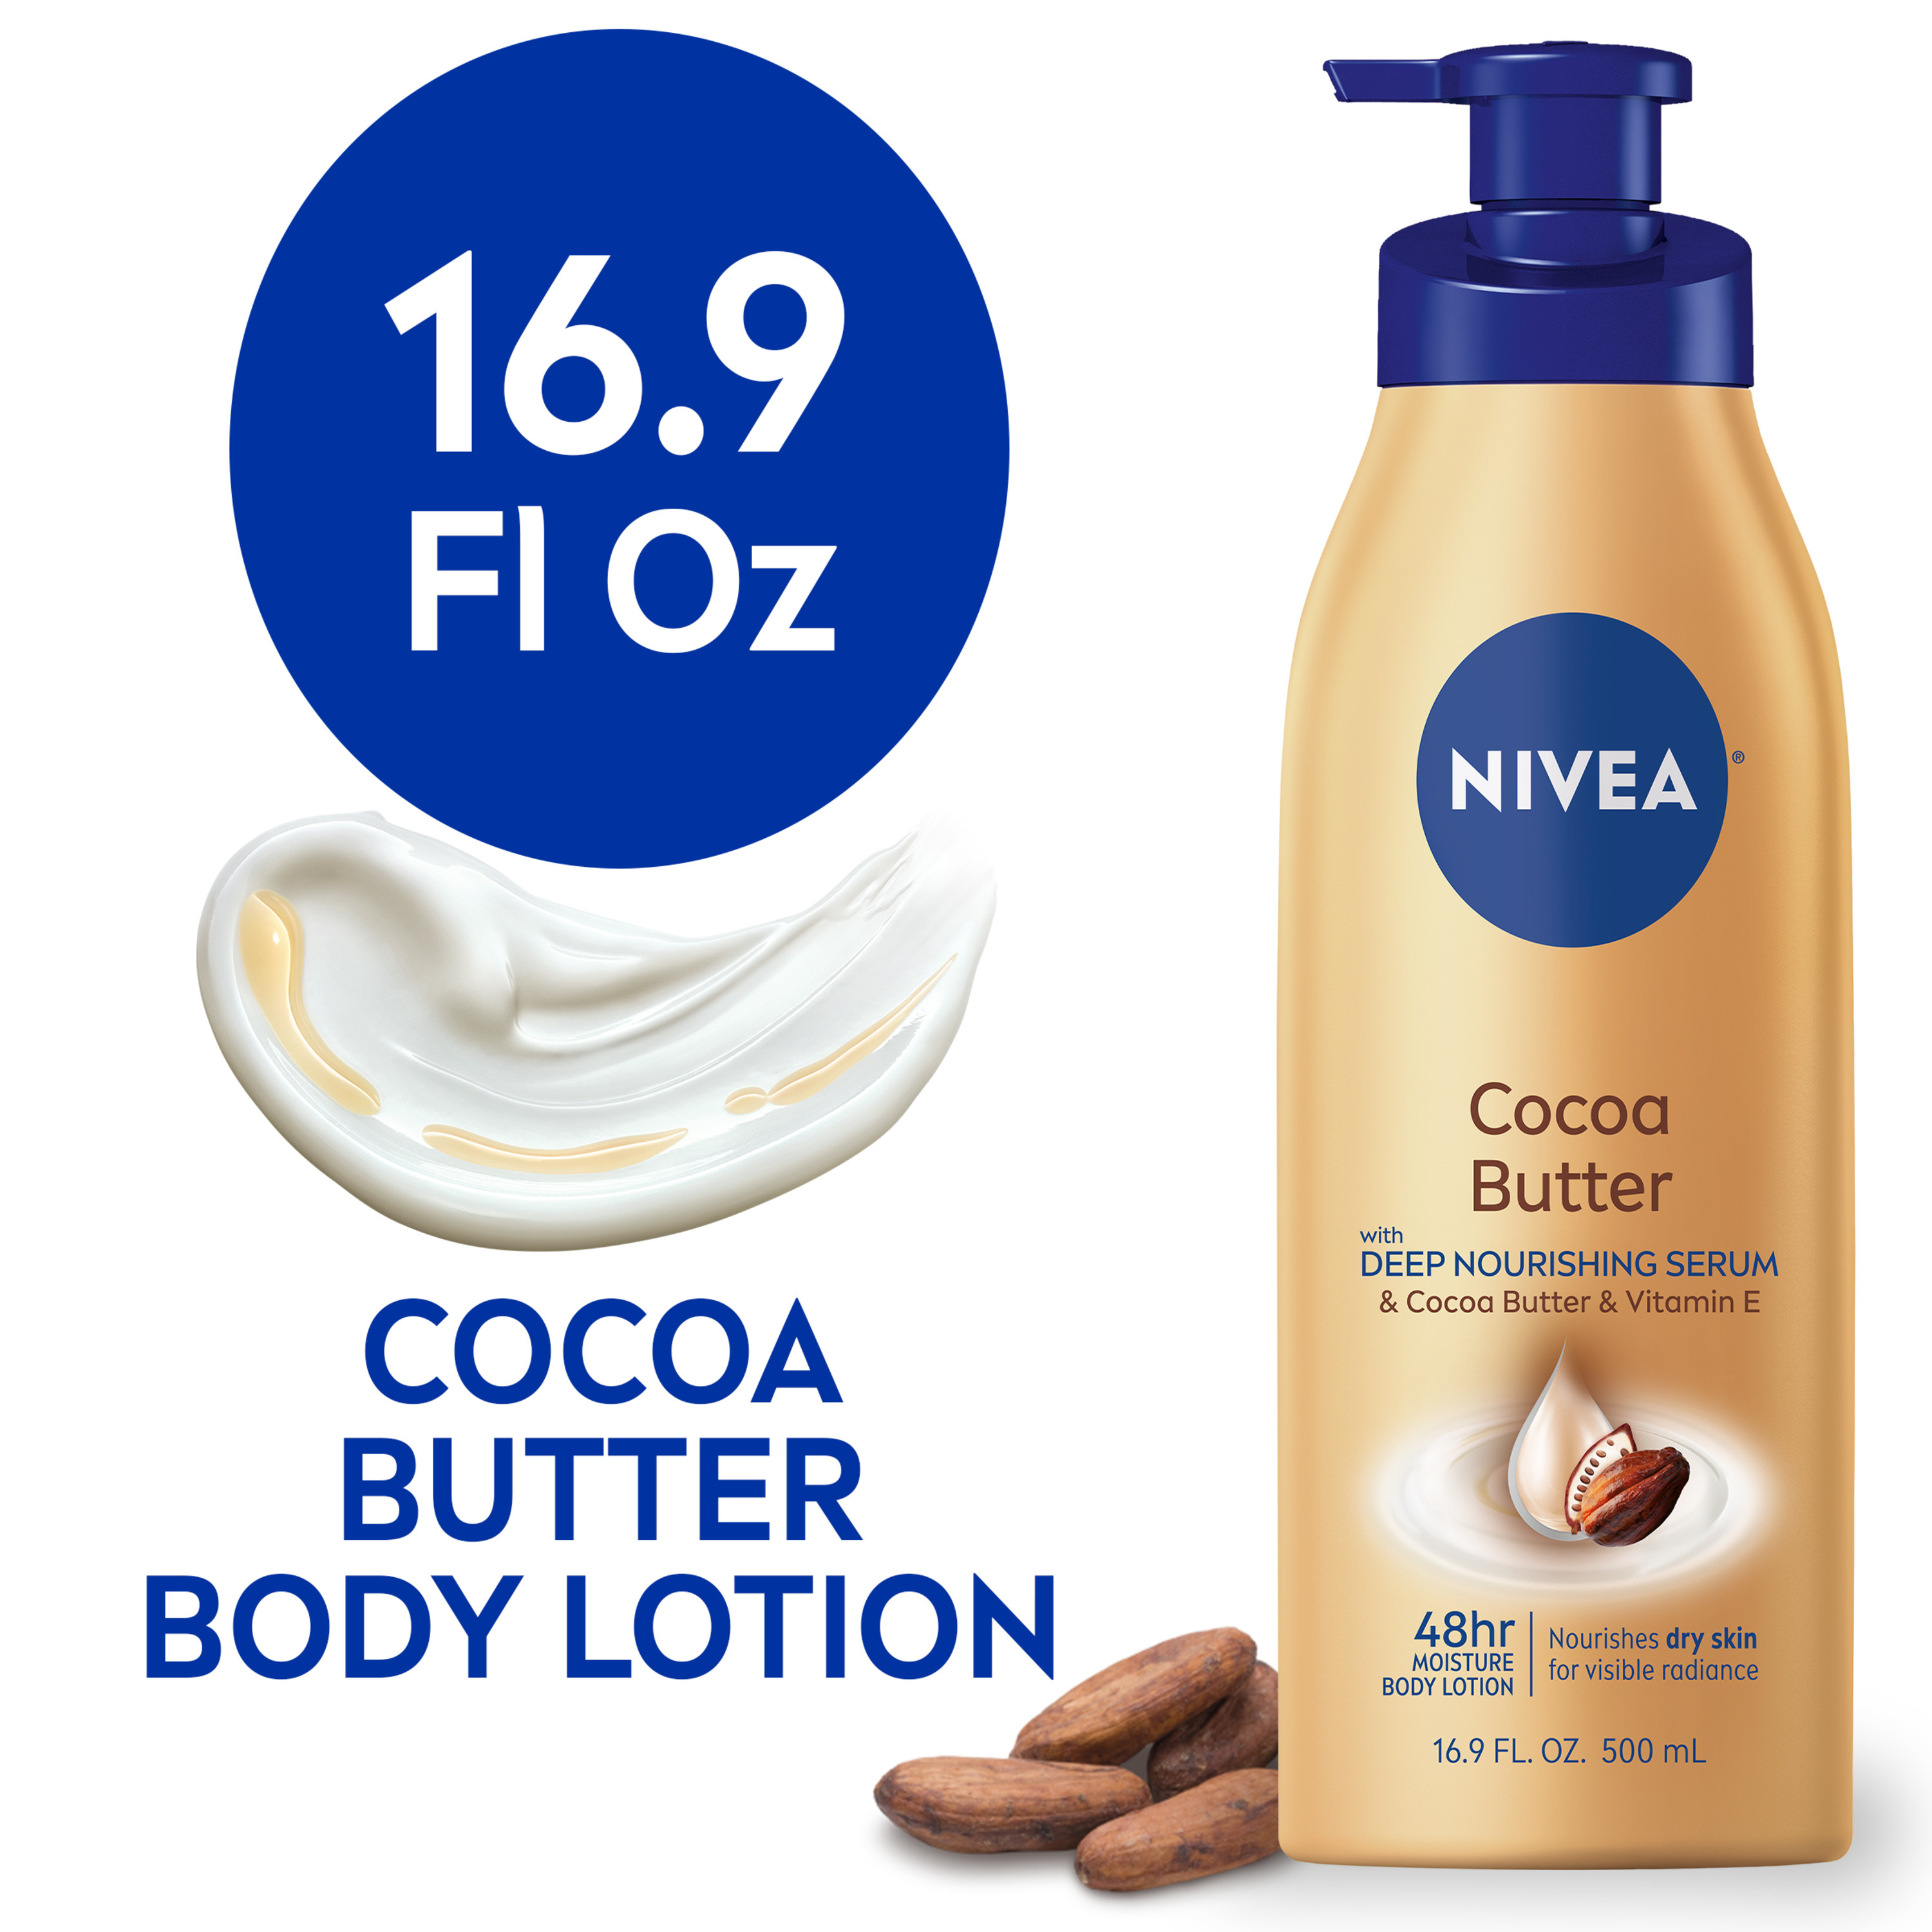 NIVEA Cocoa Butter Body Lotion with Deep Nourishing Serum, 16.9 Fl Oz - image 1 of 11